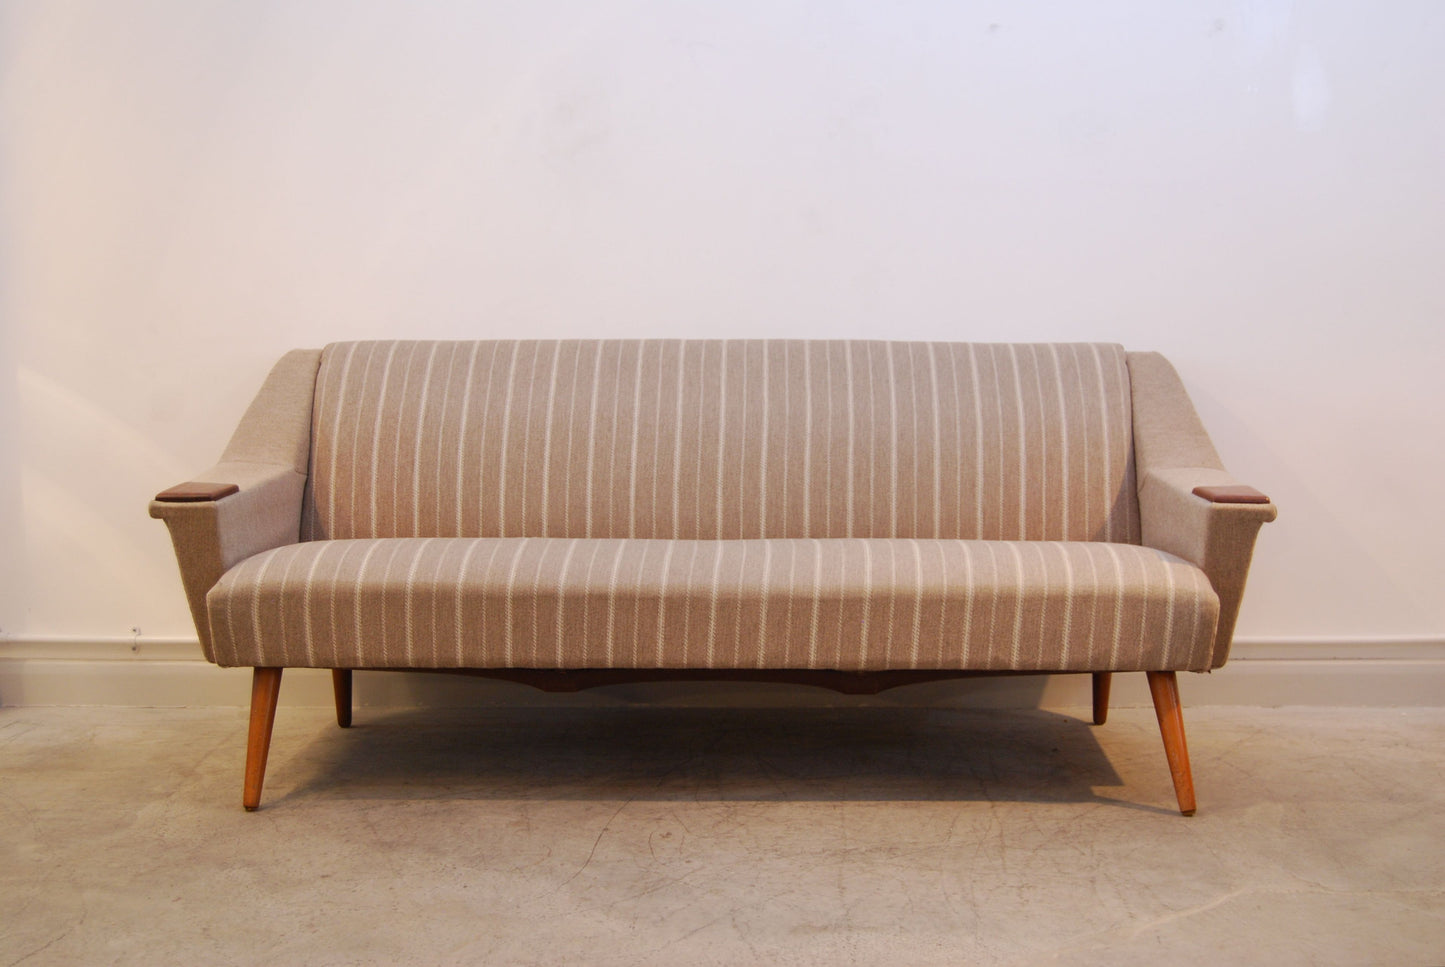 Three seat sofa with teak paws and legs